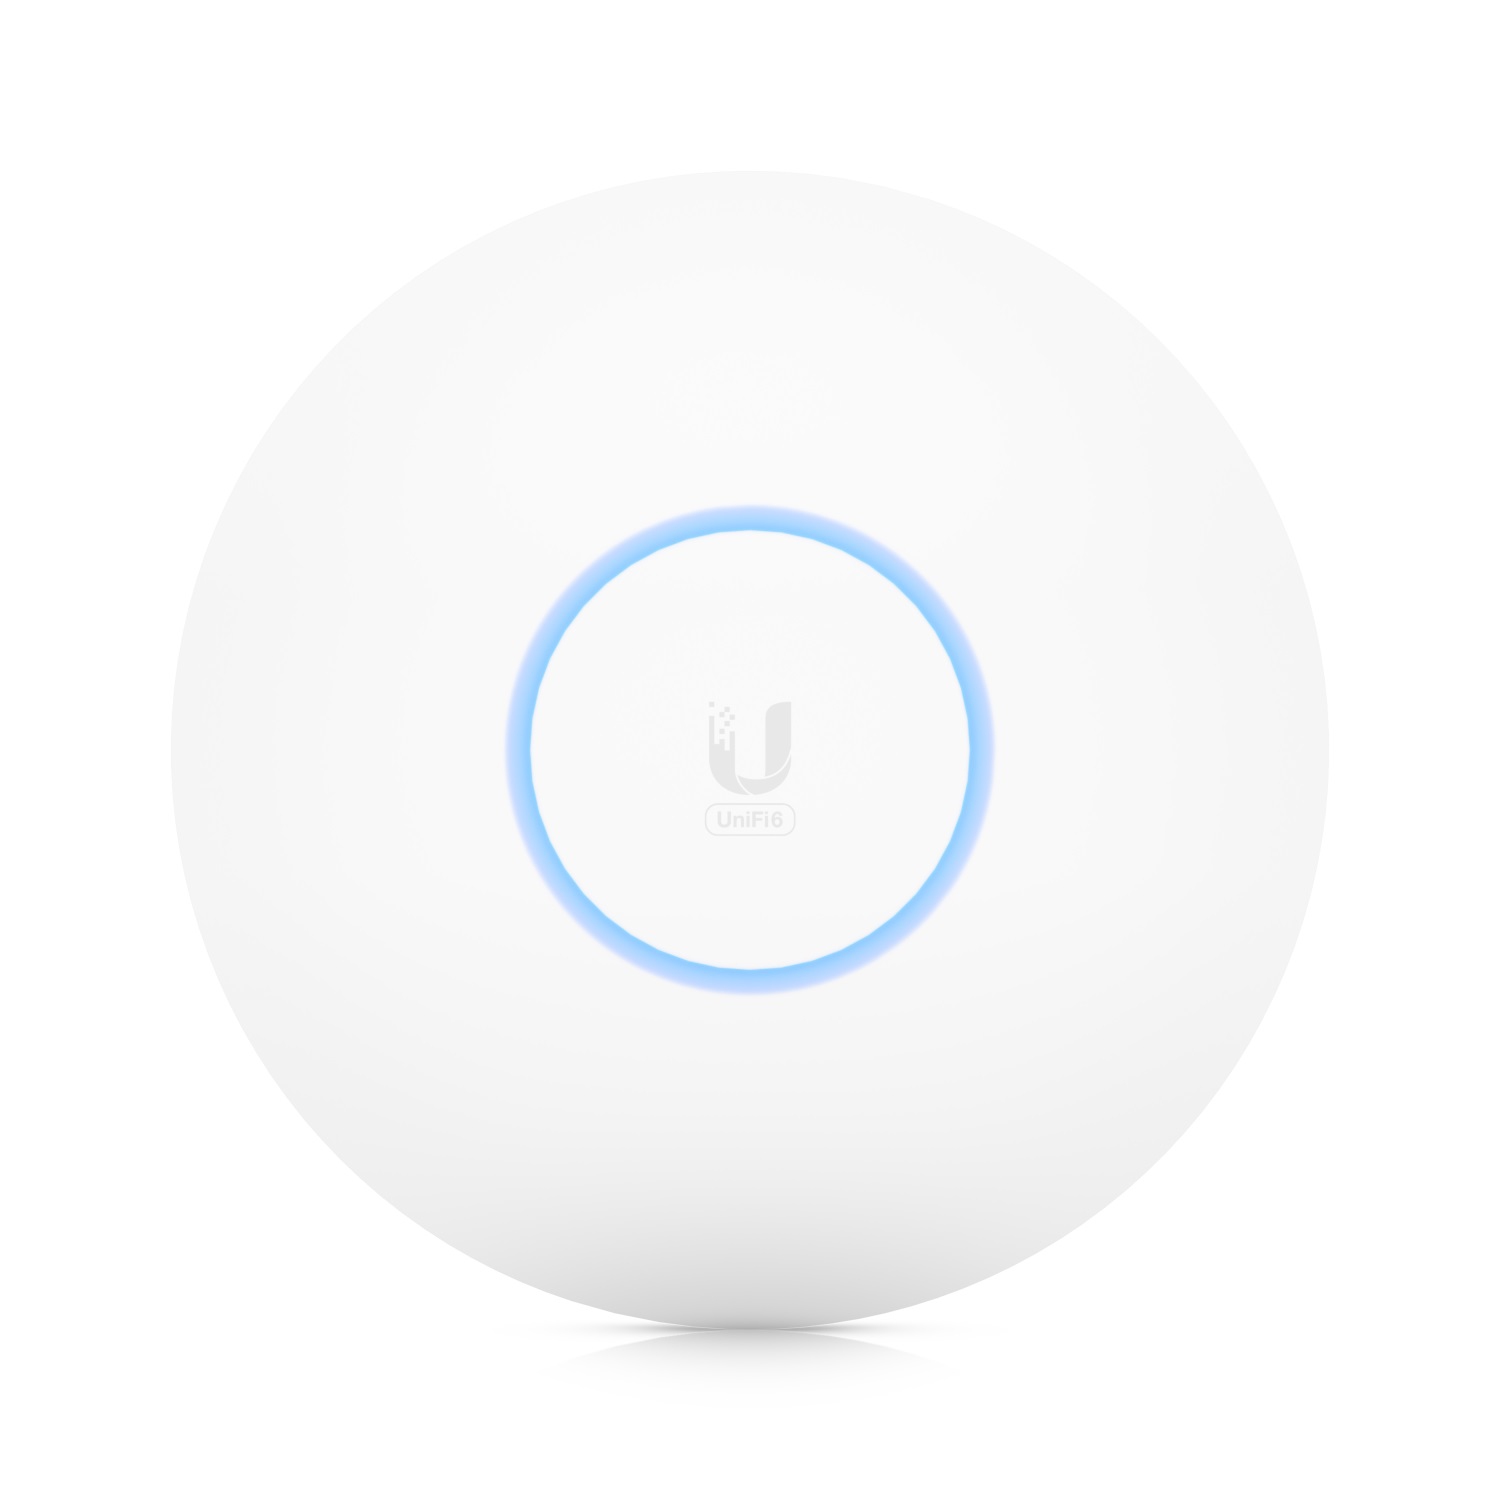 Ubiquiti UniFi6 Pro - dual-band WiFi 6 access point - support over 300 clients with its 5.3 Gbps